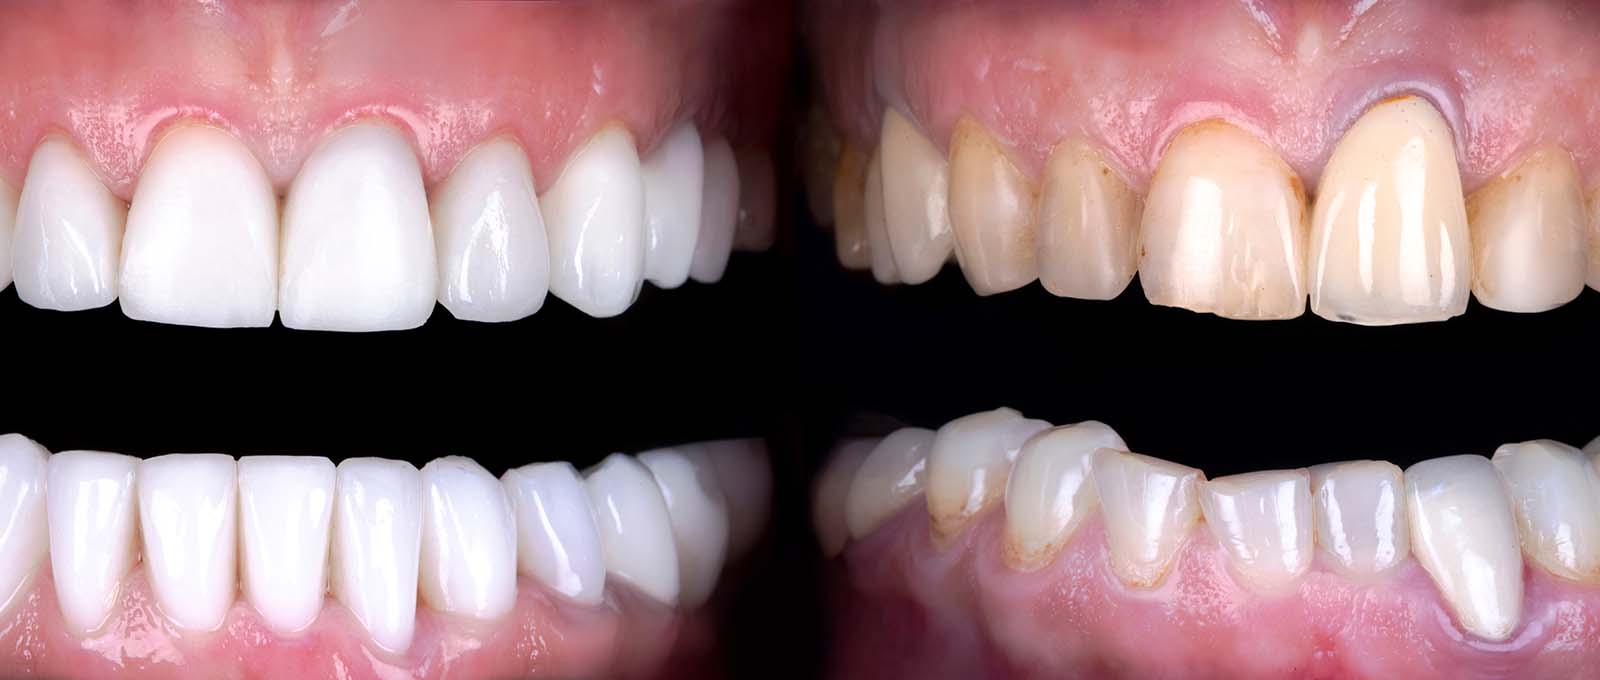 Veneers Pros and Cons